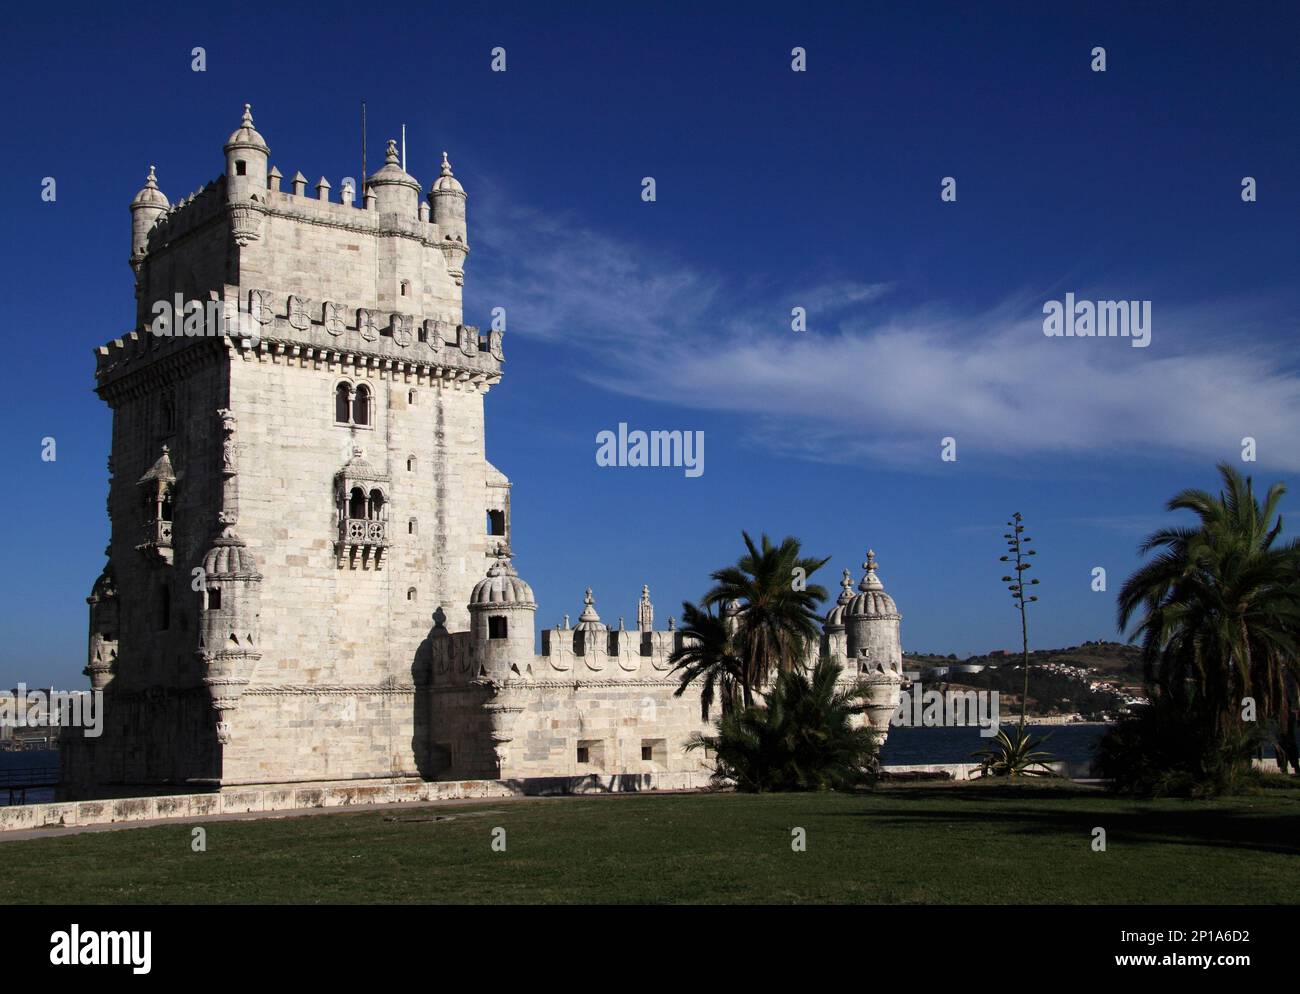 Portugal, Lisbon, Belem District - Tower of Belem Monument from the time of the Portuguese voyages of Discovery - overlooking the River Tagus or Tejo Stock Photo